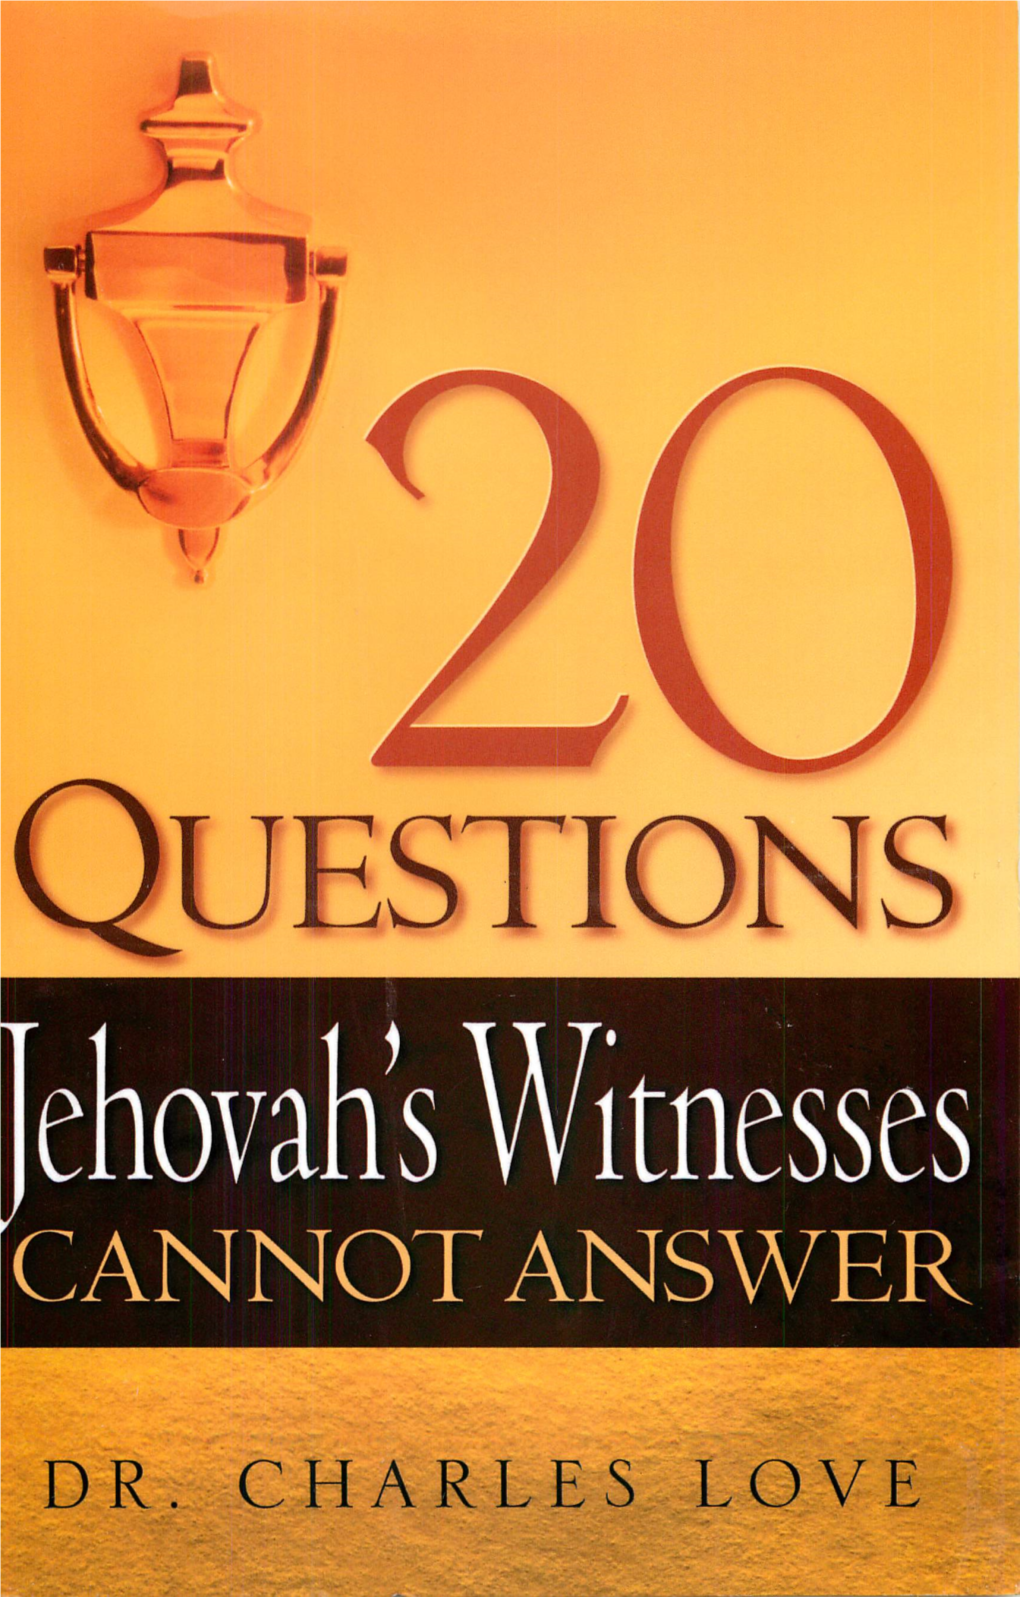 Of Jehovah's Witnesses 15